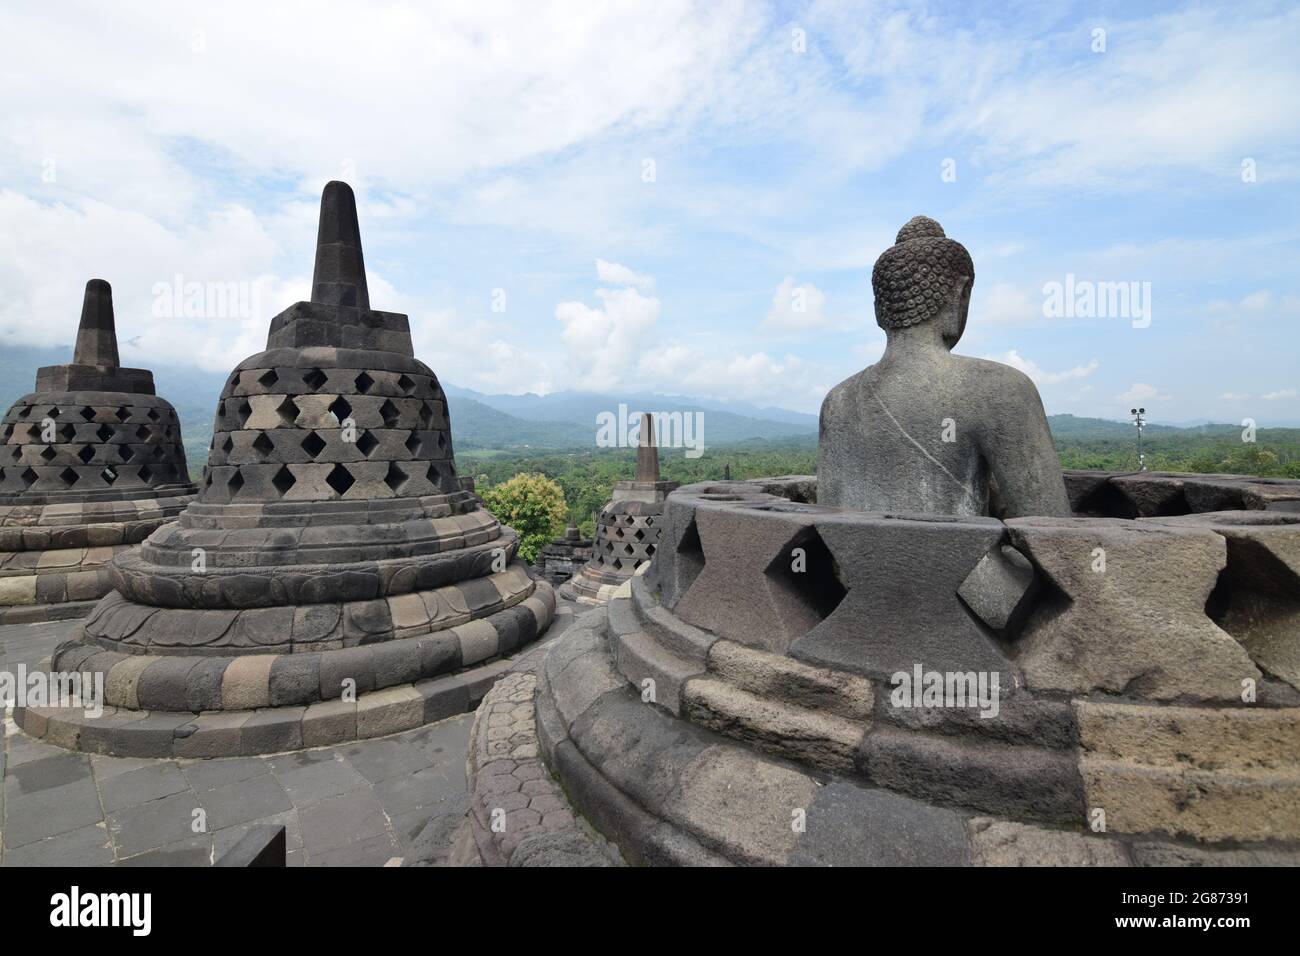 Buddha statue in an open stupa at the Borobudur temple in Java Stock Photo